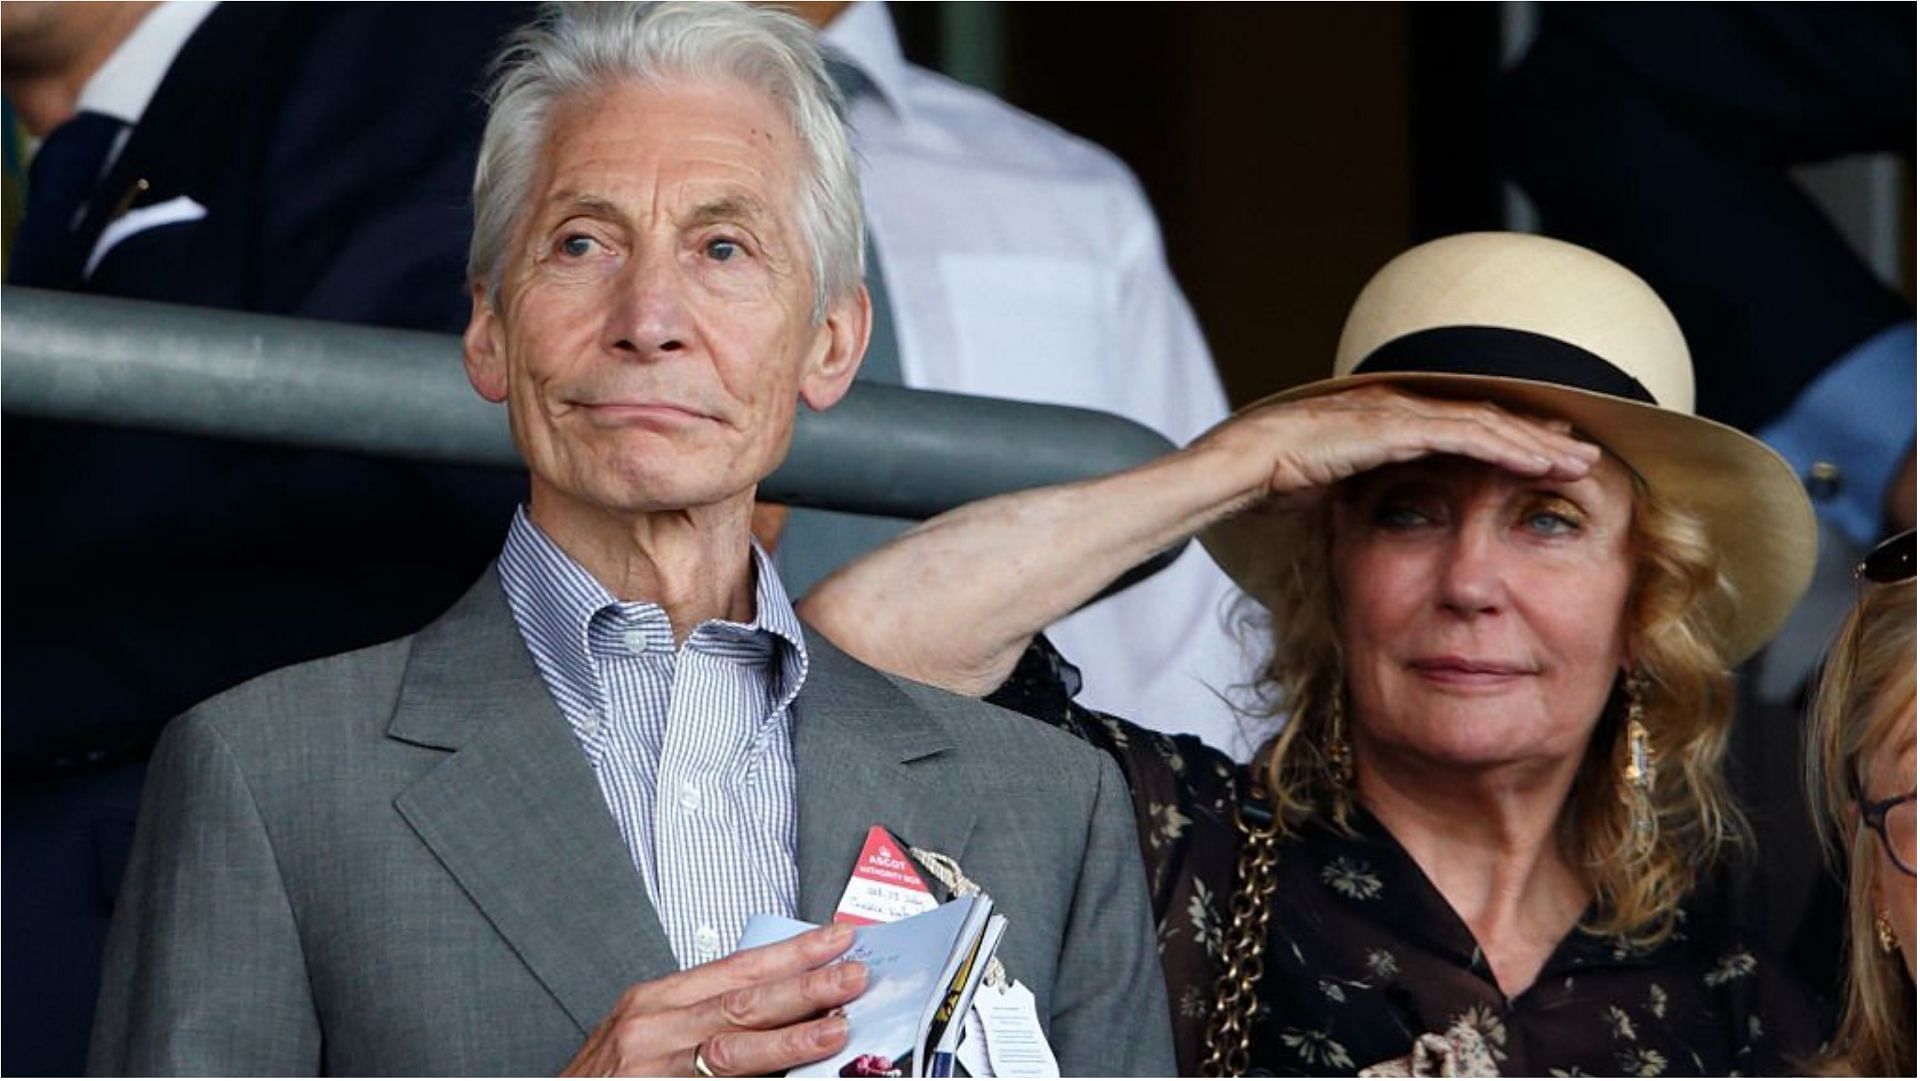 Charlie Watts and Shirley Watts were married since 1963 (Image via Max Mumby/Getty Images)